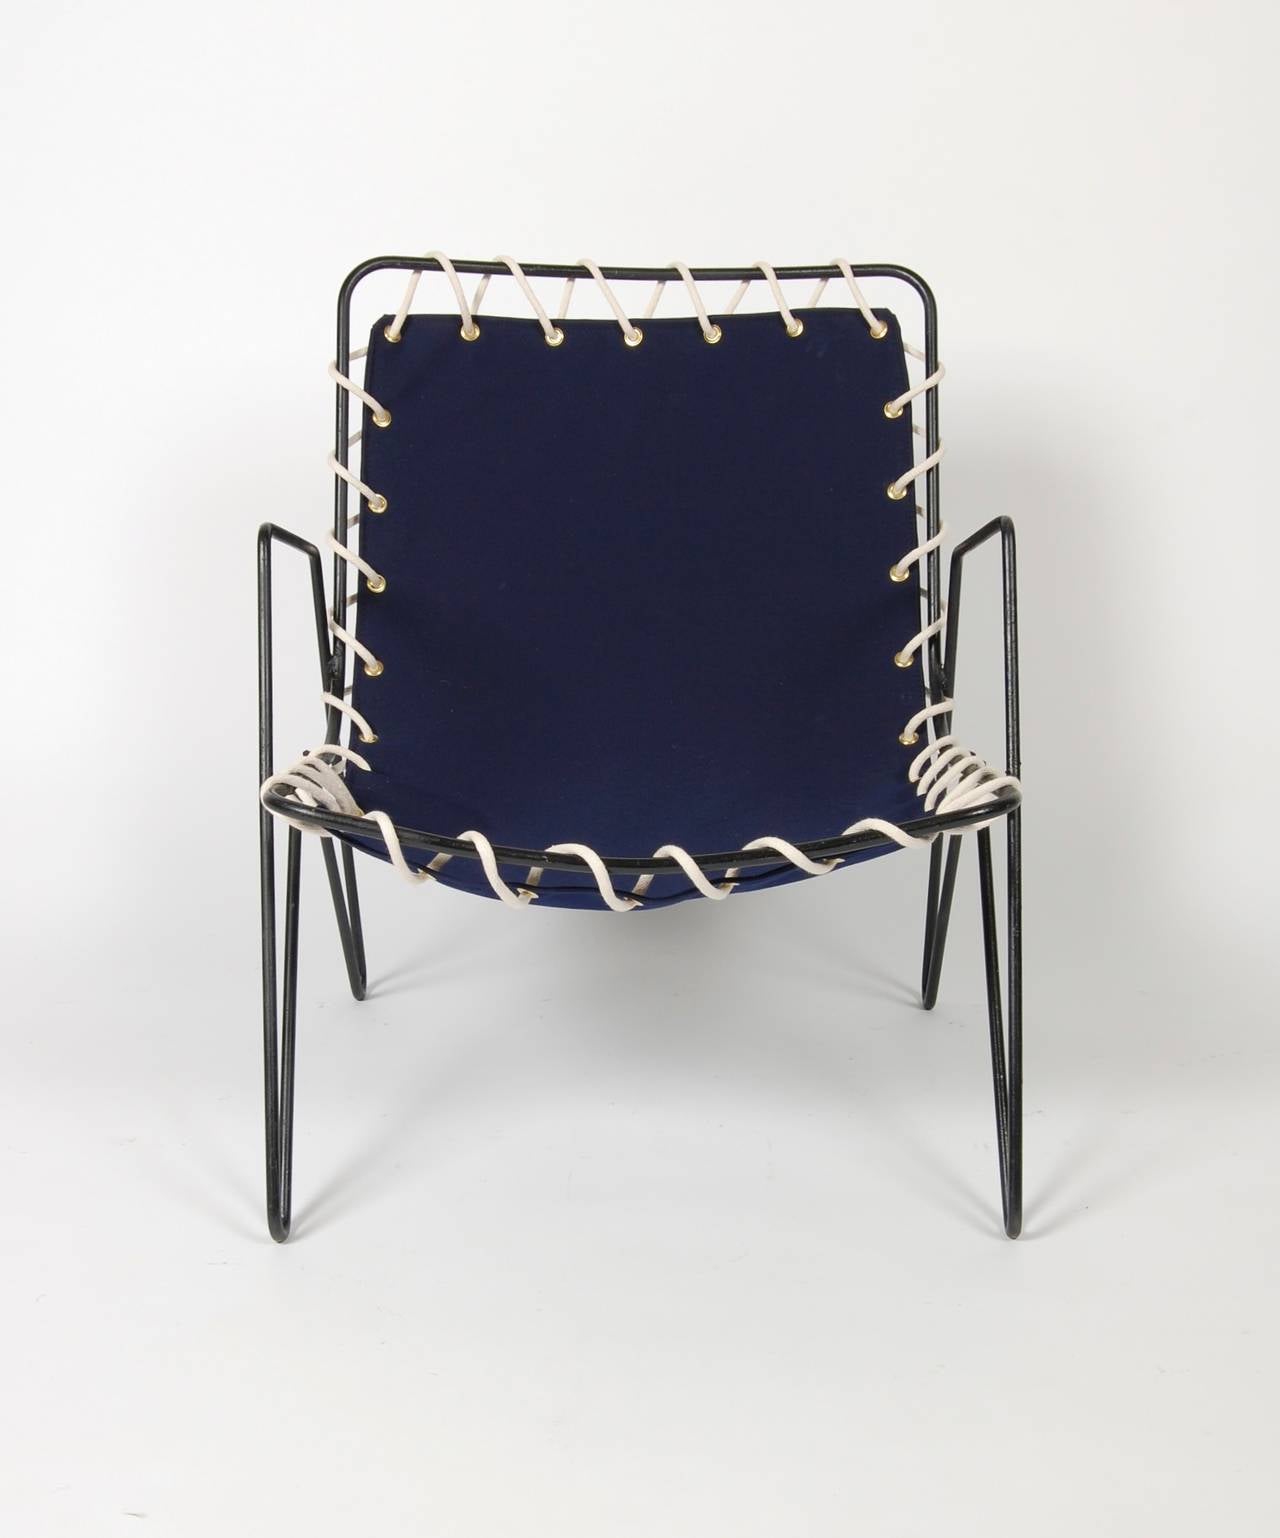 Mid-20th Century Modernist Iron and Blue Canvas Patio Lounge Chair, 1950s